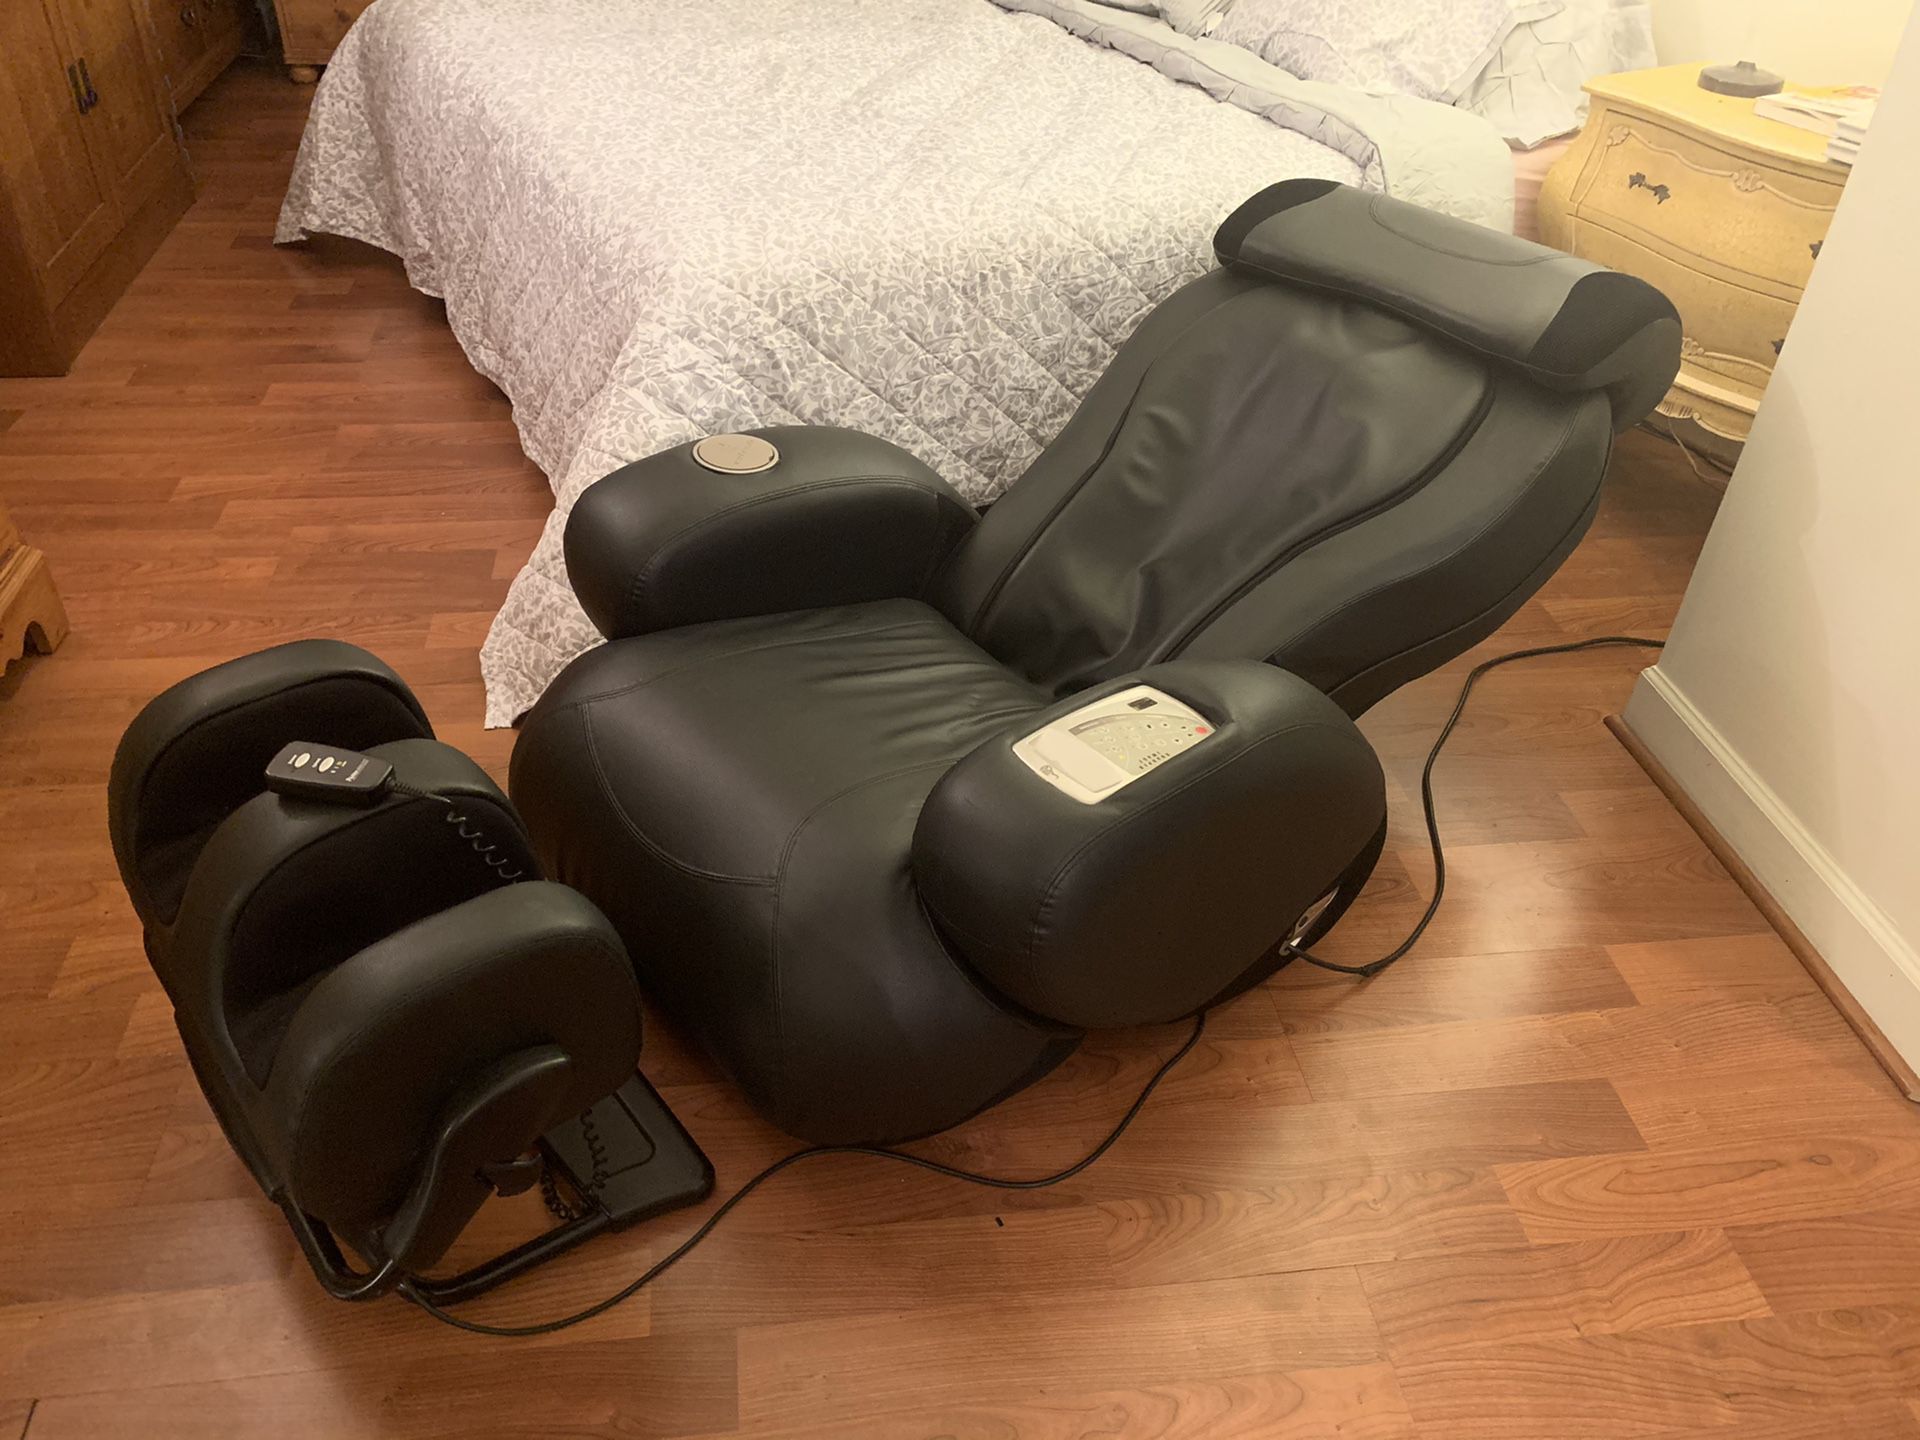 iJoy Massage Chair With Ottoman 2.0 - I CAN DELIVERY